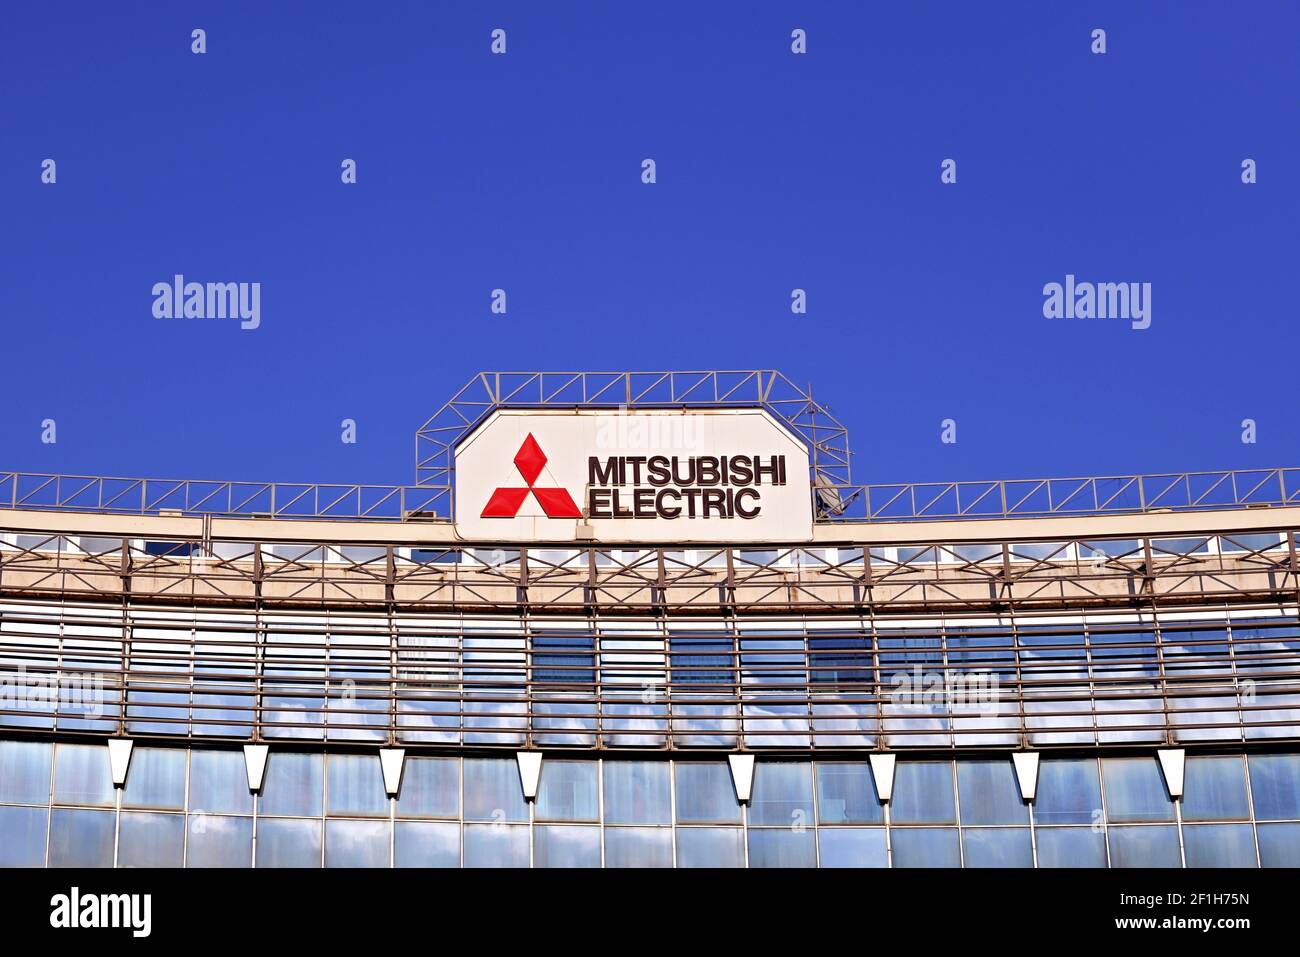 Mitsubishi Electric logo sign on the roof of a building. Rome, Italy, Europe, EU Stock Photo